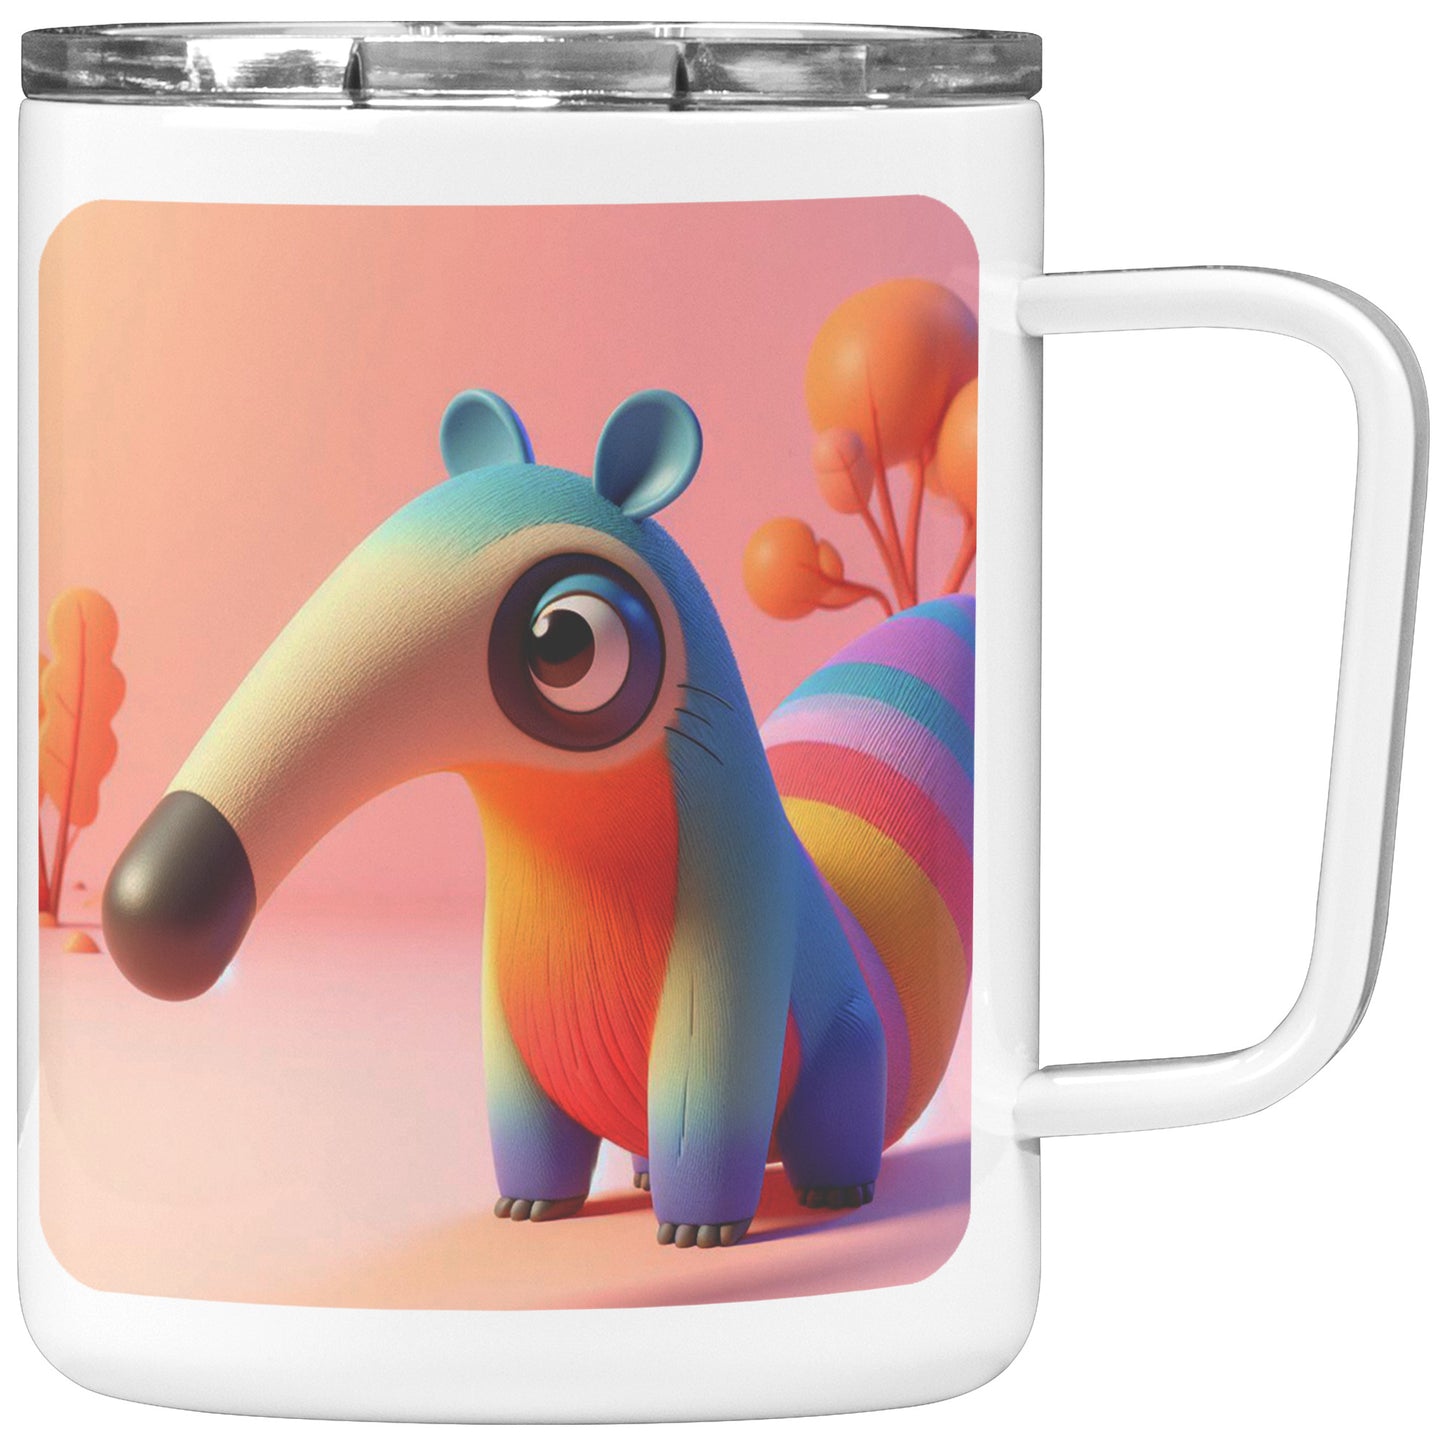 Animals, Insects and Birds - Anteater Coffee Mug #8